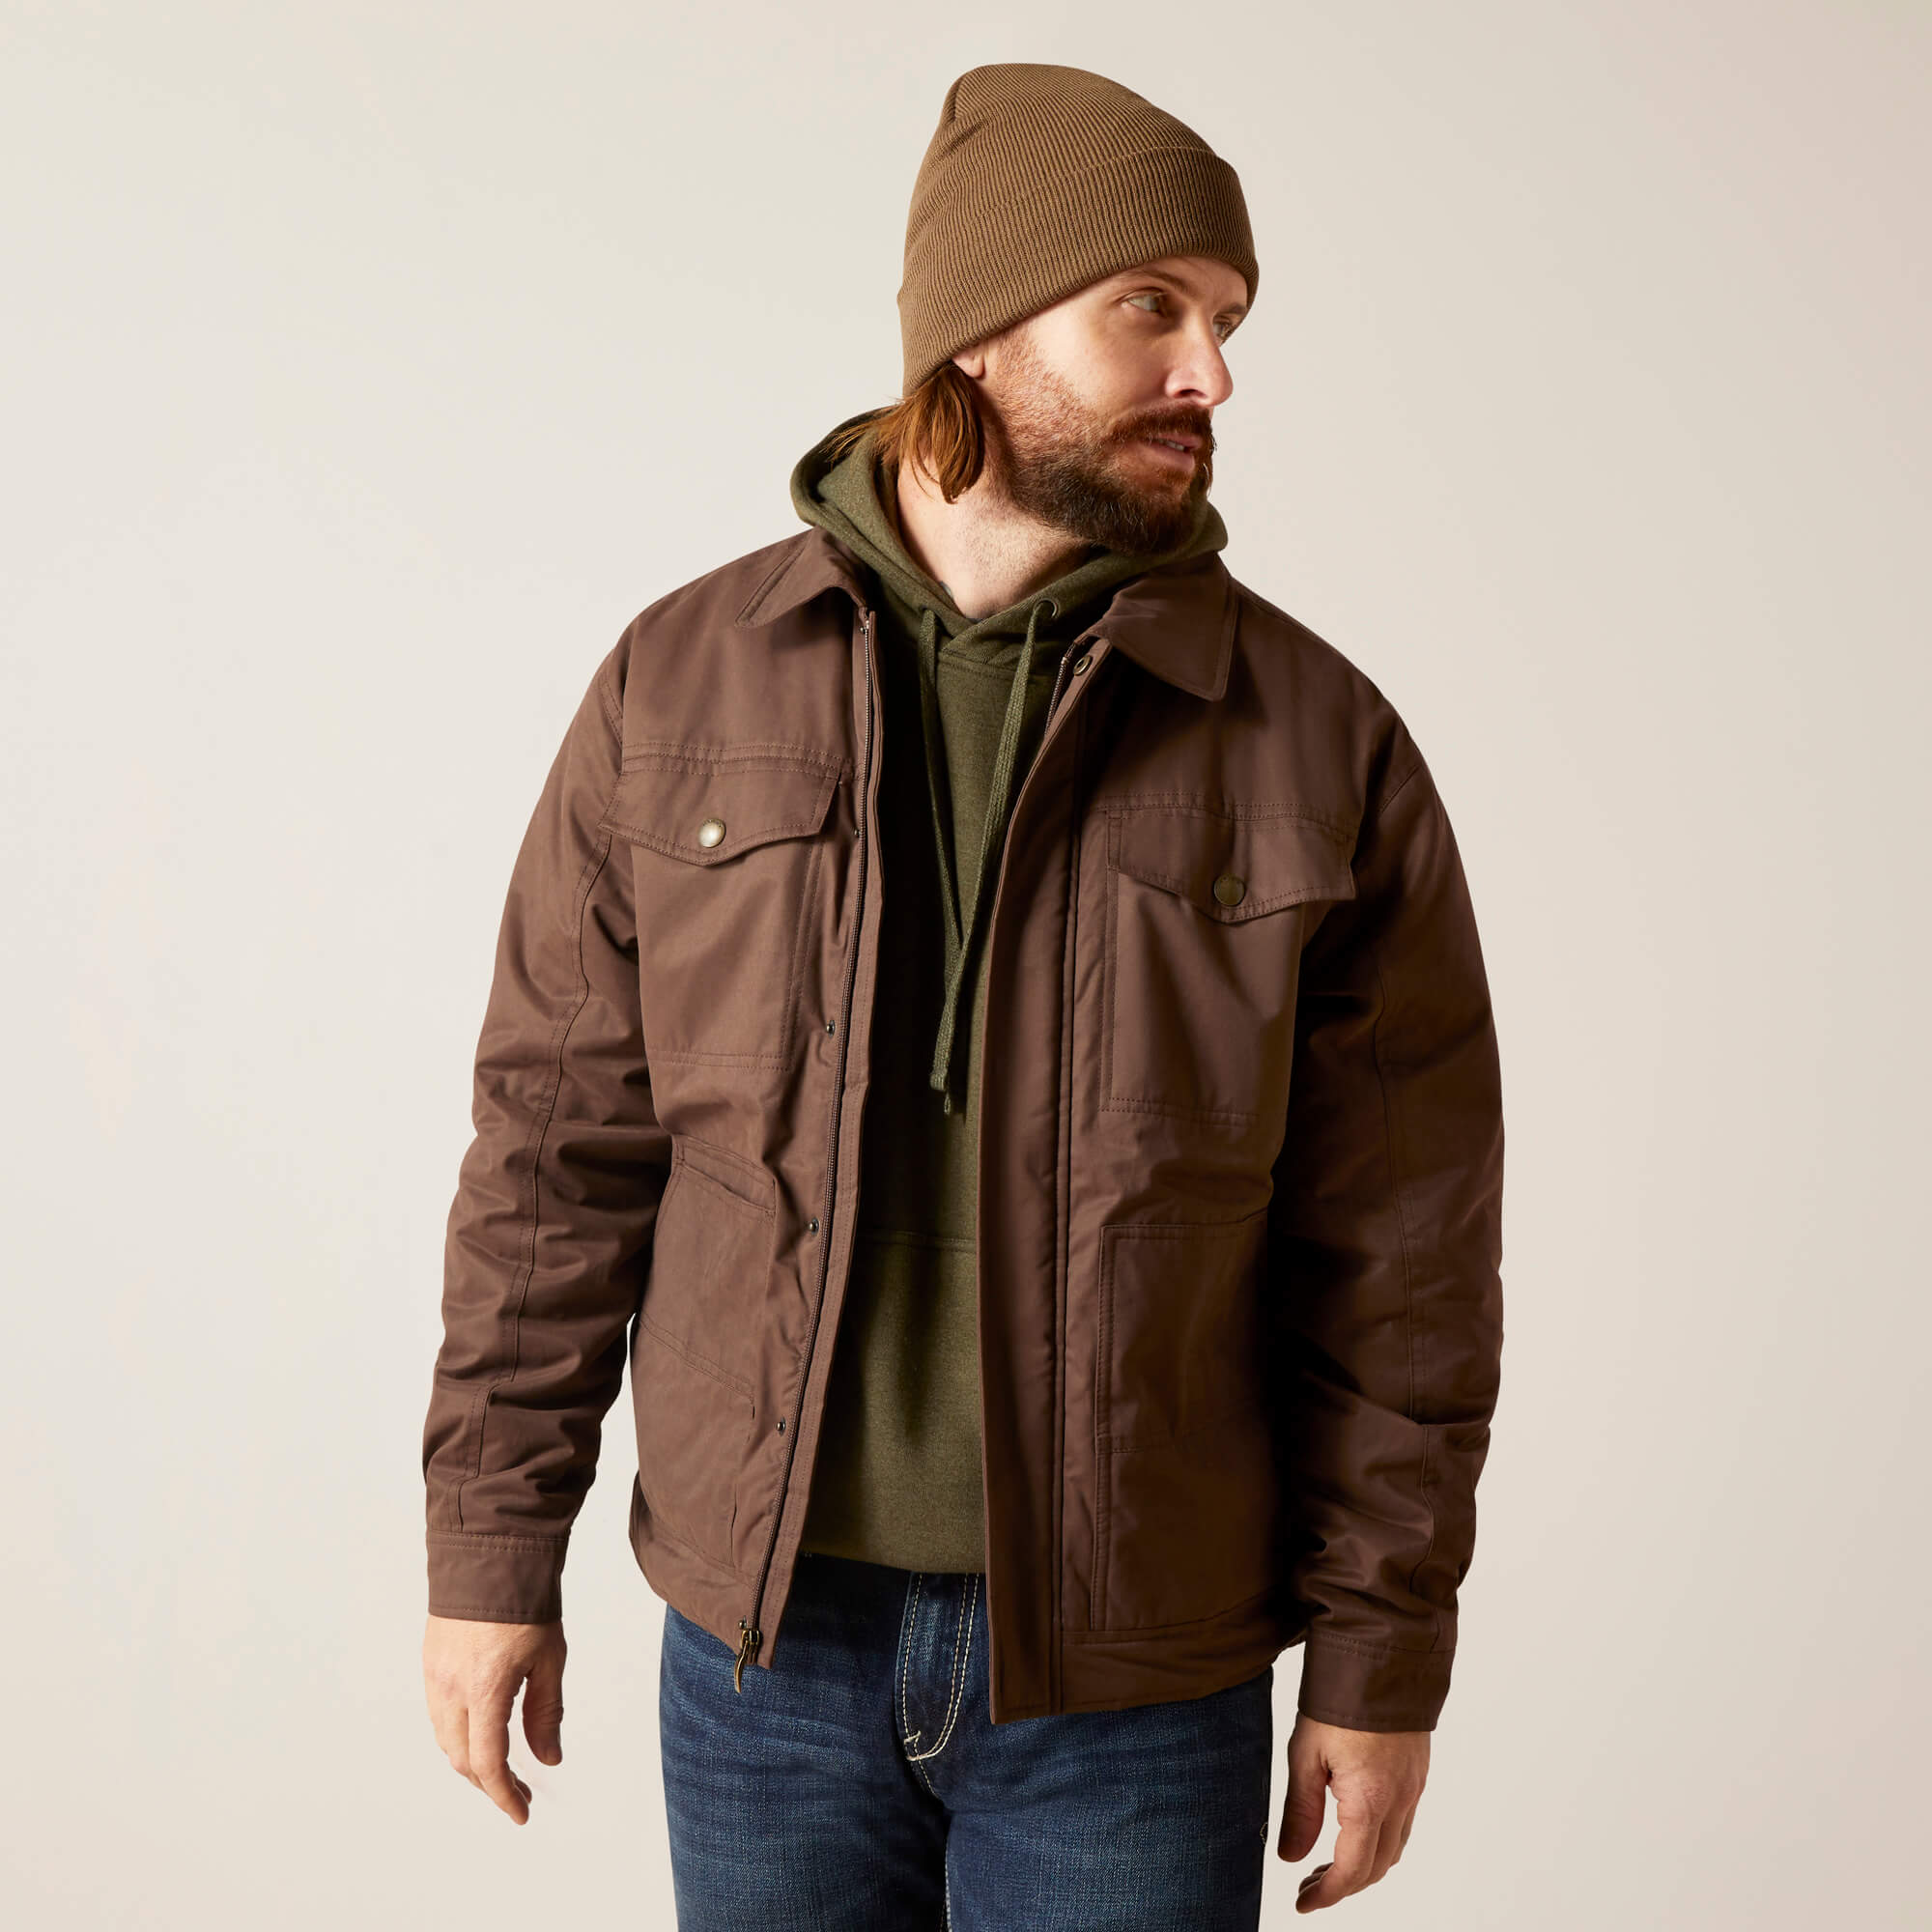 Ariat Mens Grizzly 2.0 Canvas Conceal and Carry Jacket (Bracken)